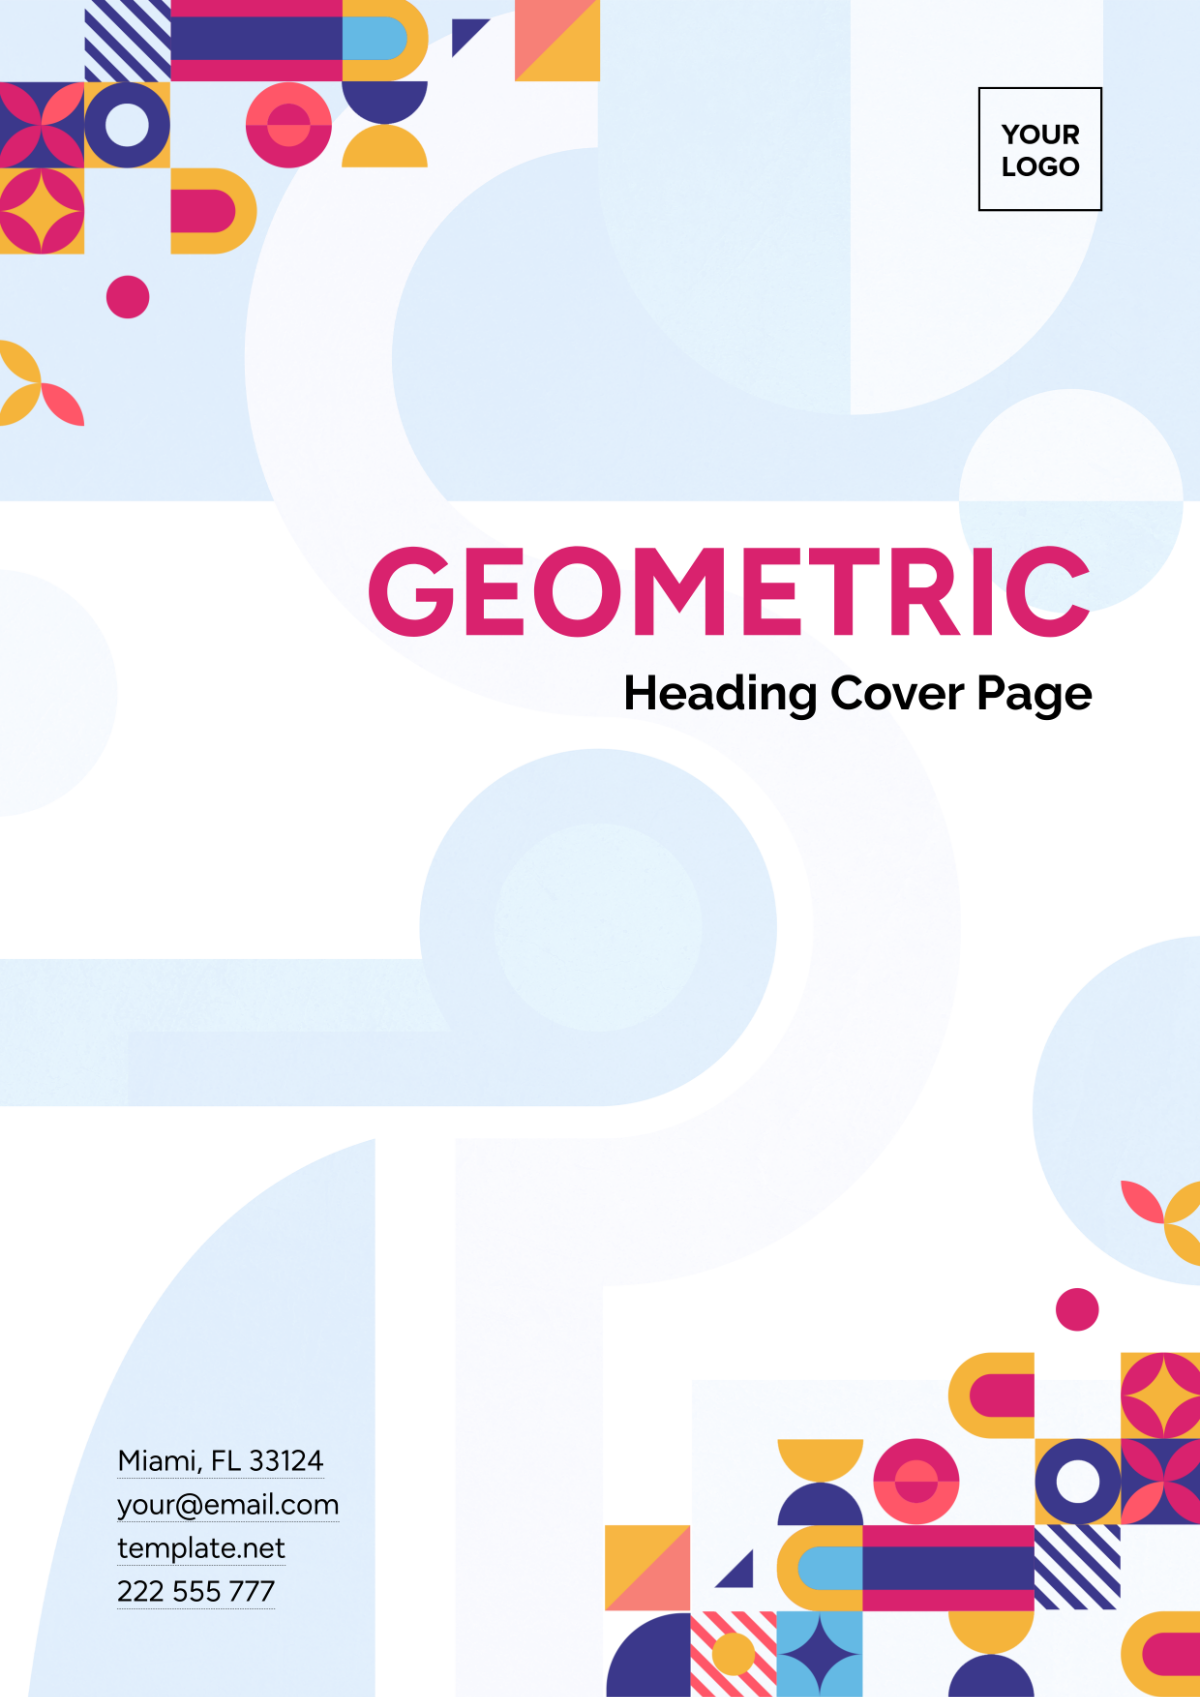 Free Geometric Heading Cover Page Template